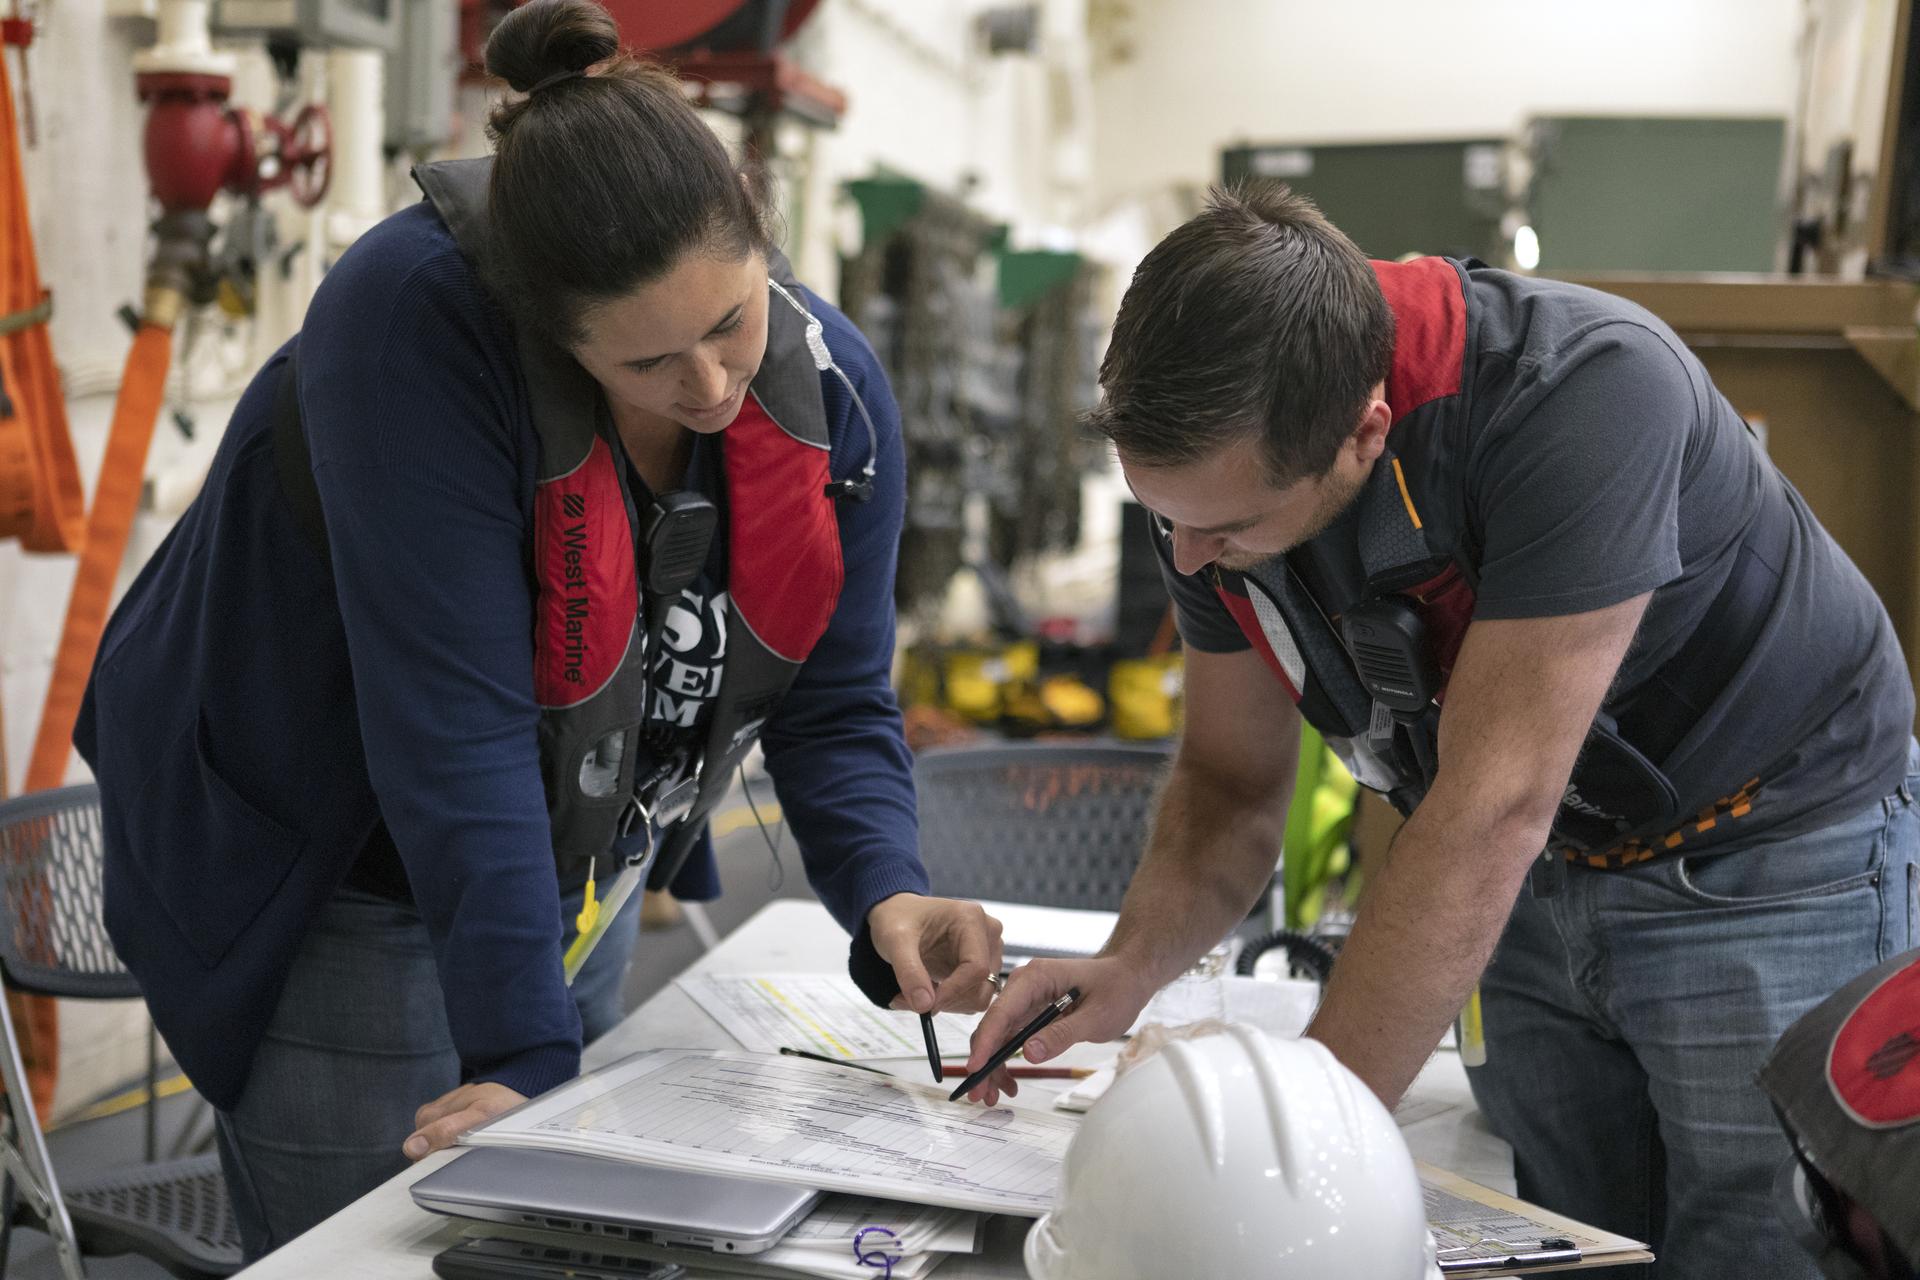 NASA Landing and Recovery Director Melissa Jones looks at a sheet of paper on a desk with a recovery team member.